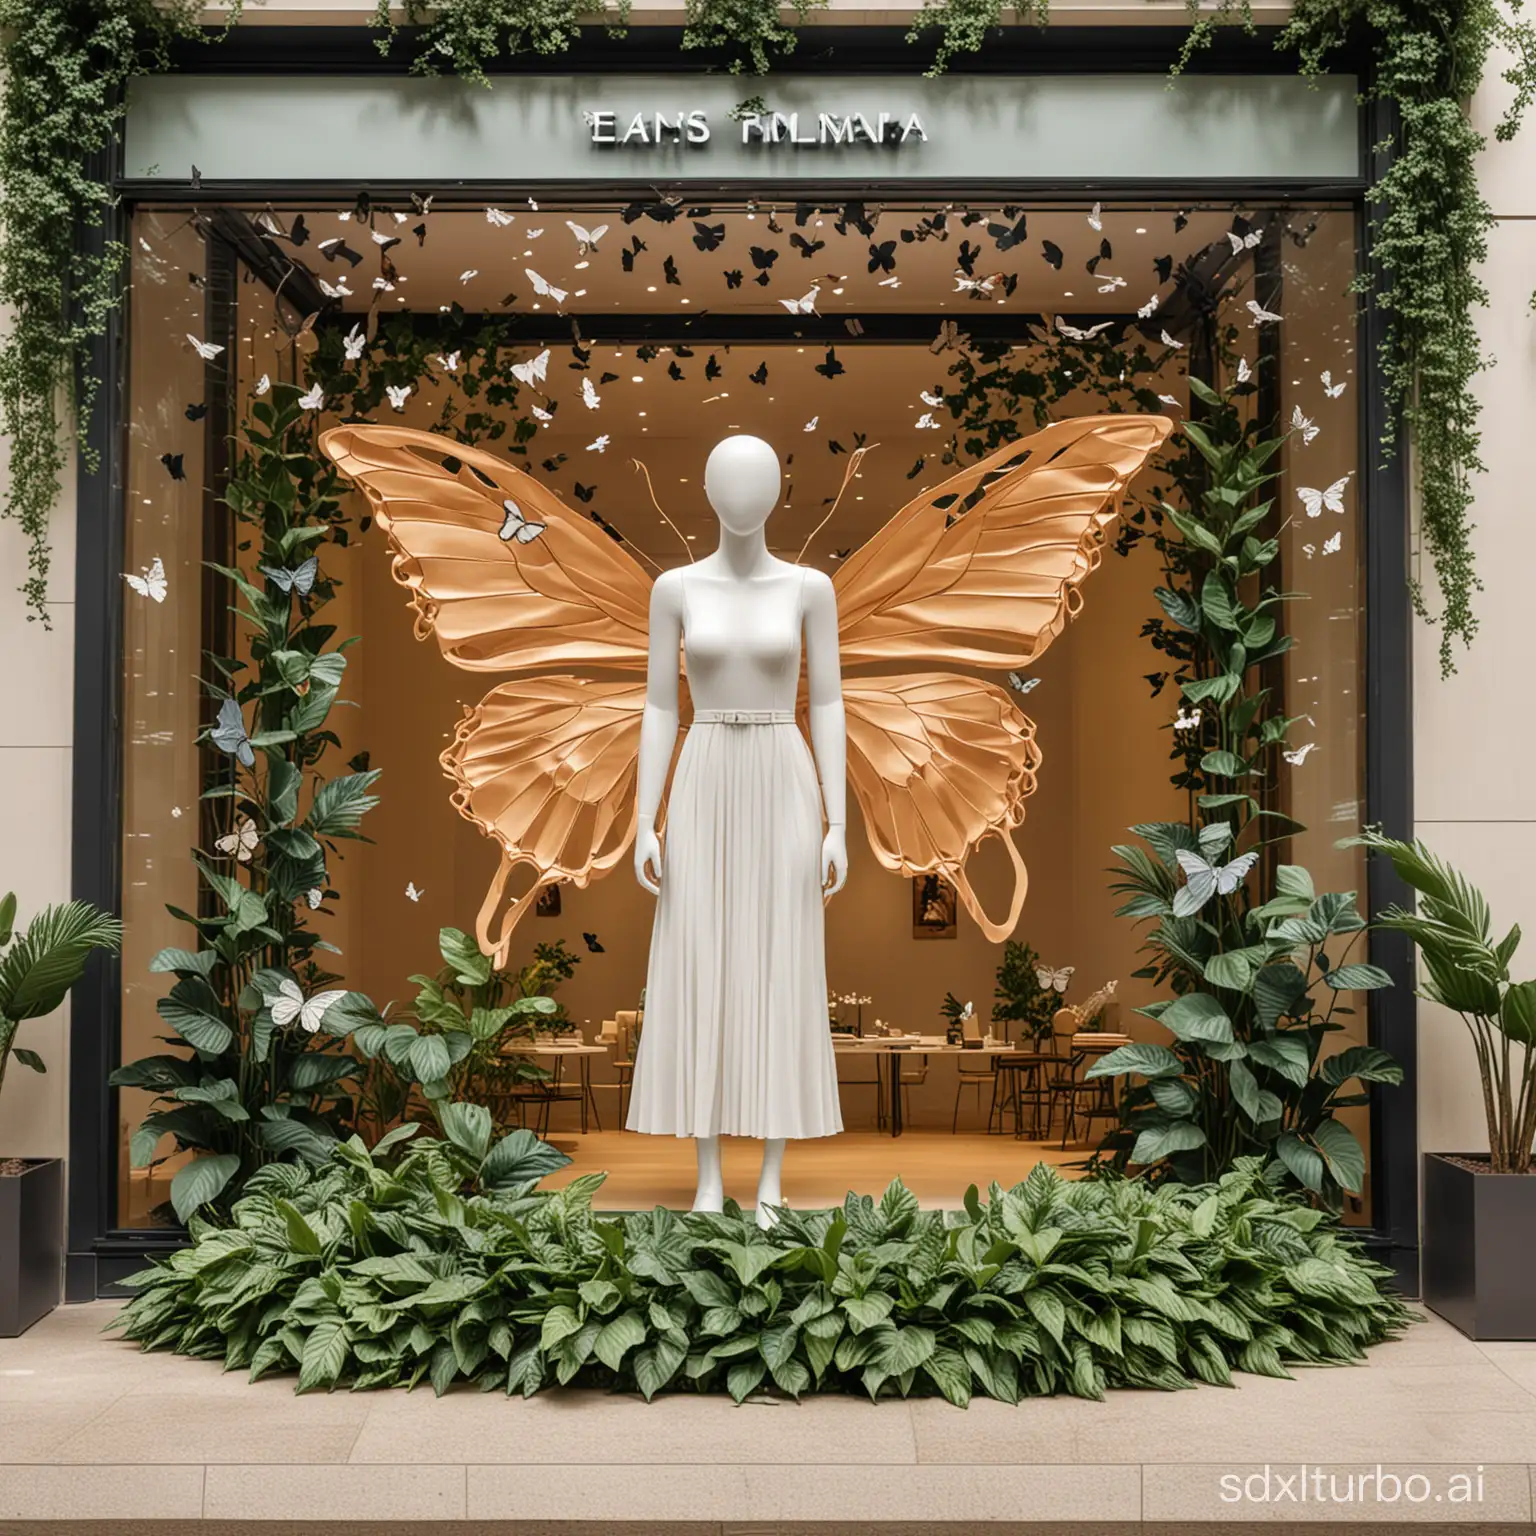 A storefront window of a women's clothing store in a mall, with a huge butterfly sculpture in the middle surrounded by leaves around the model, the style is simple